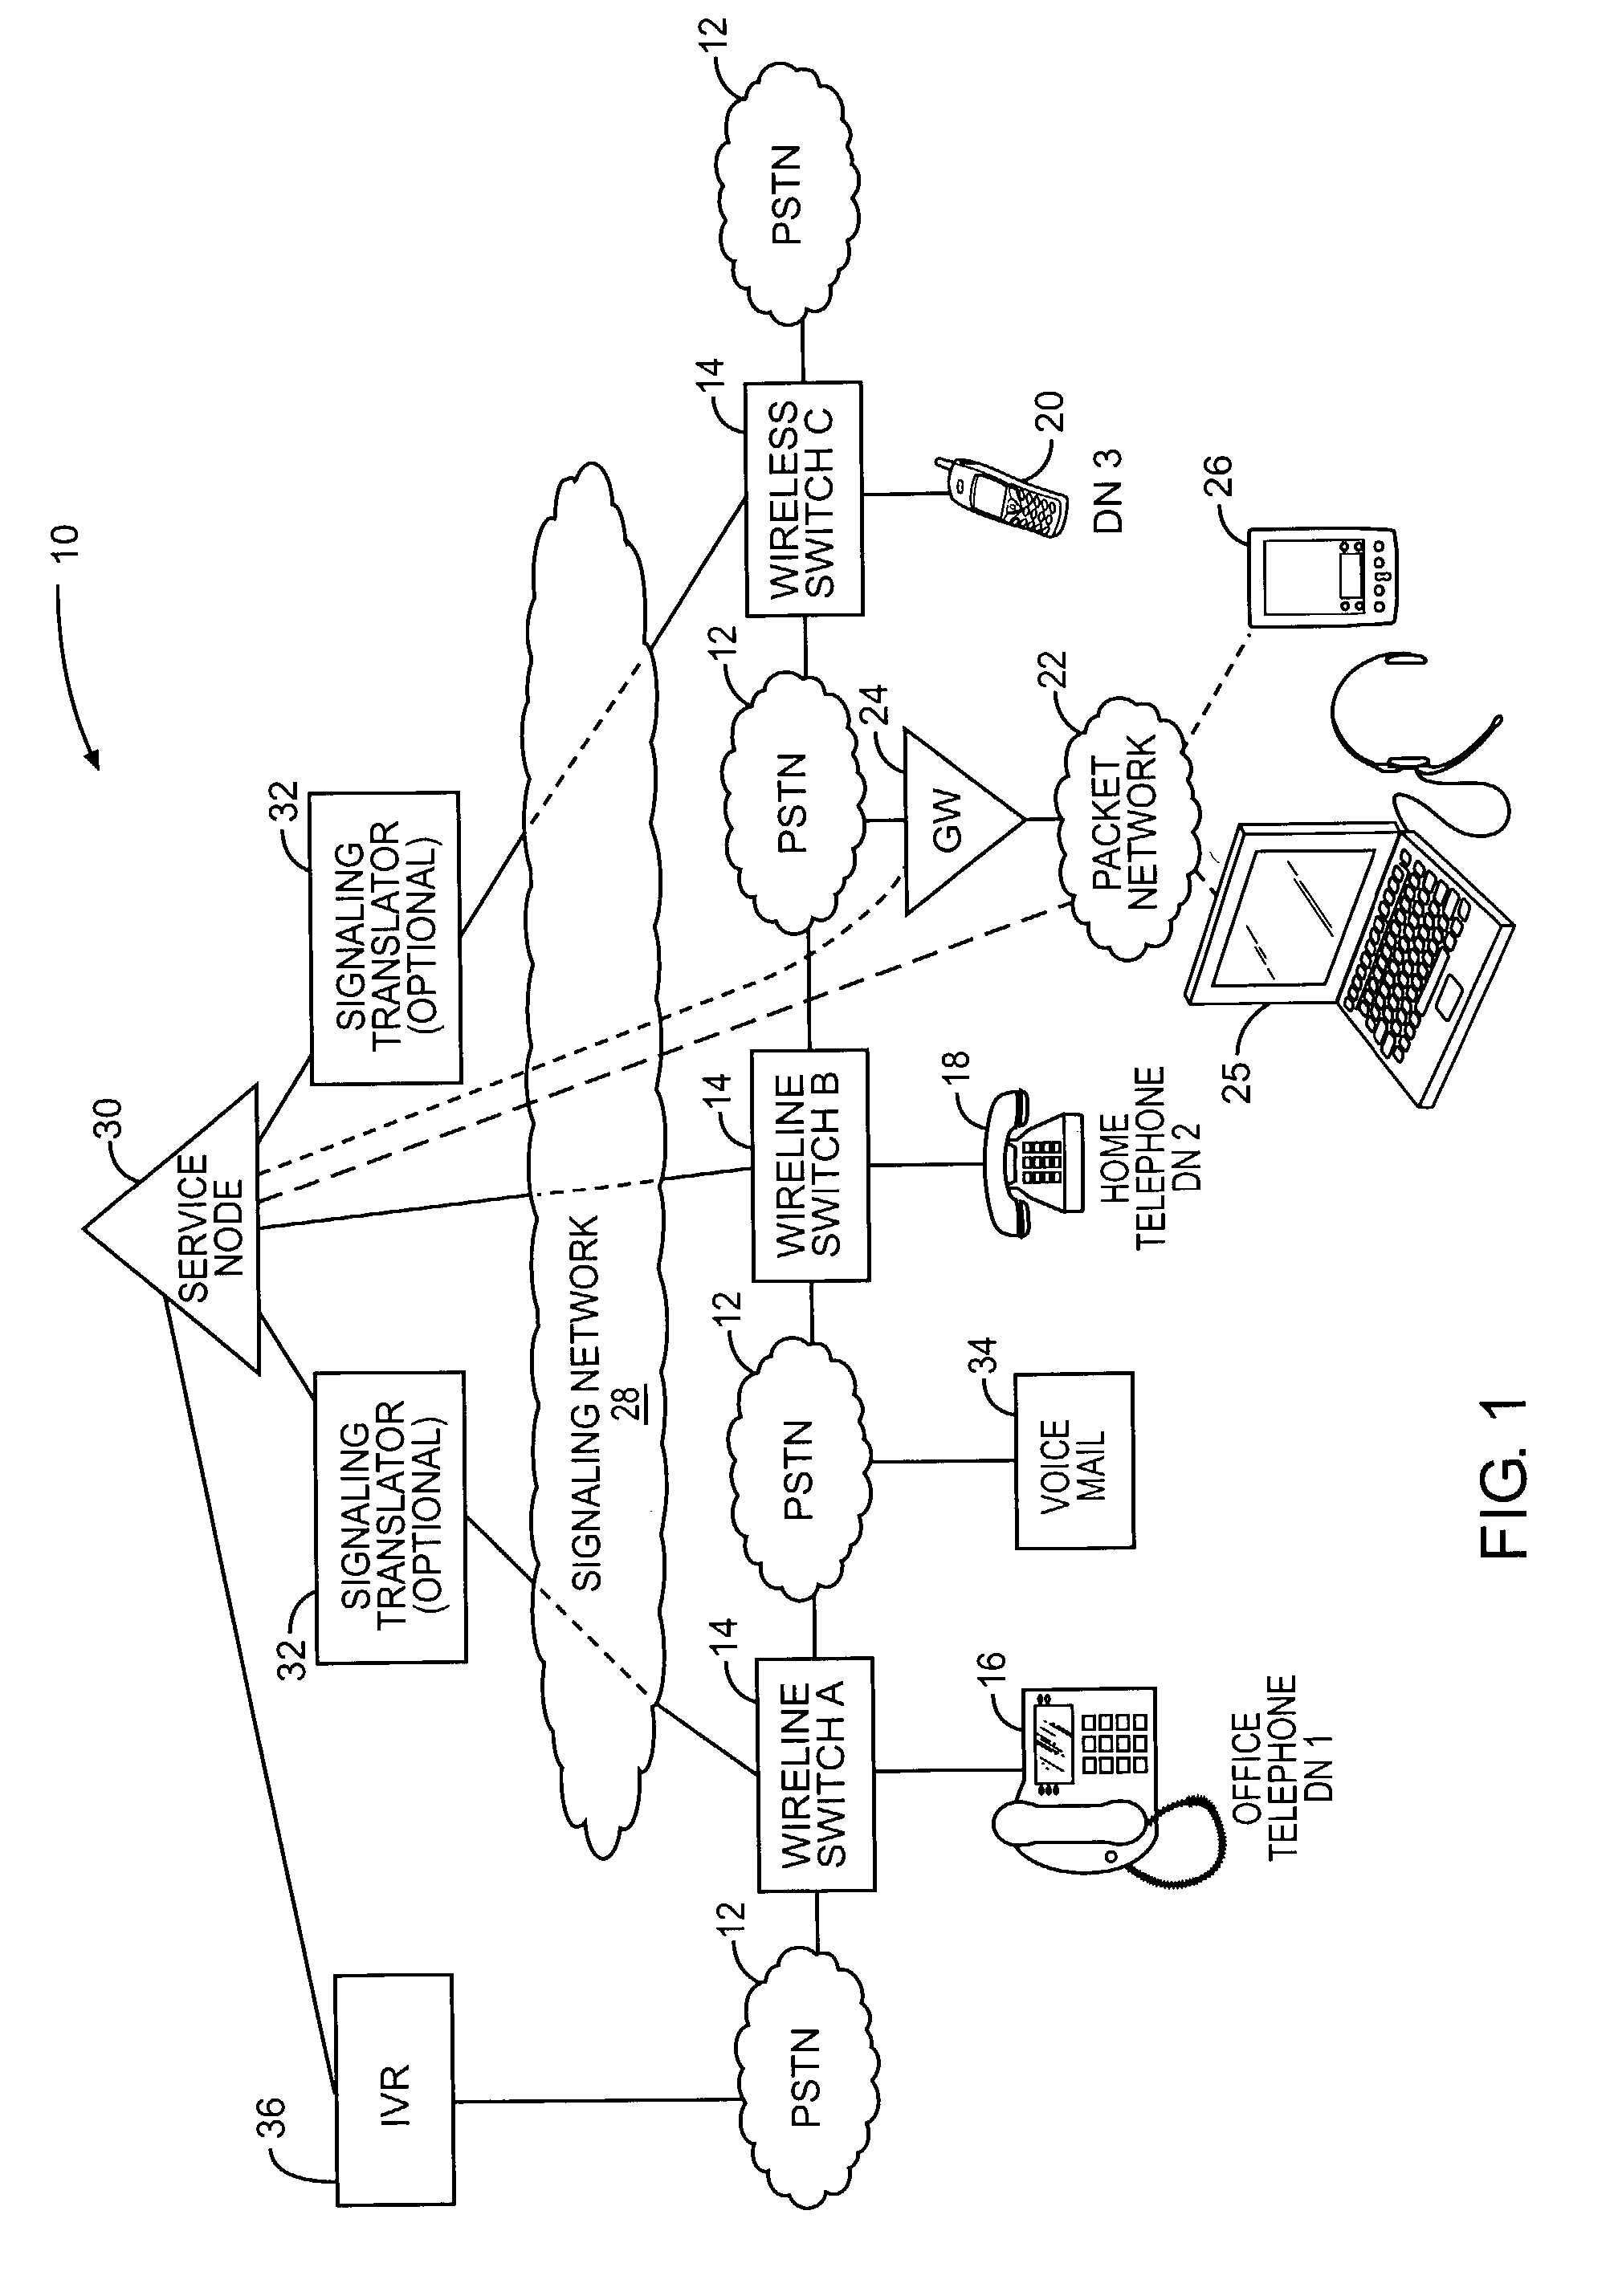 User controlled call routing for multiple telephony devices